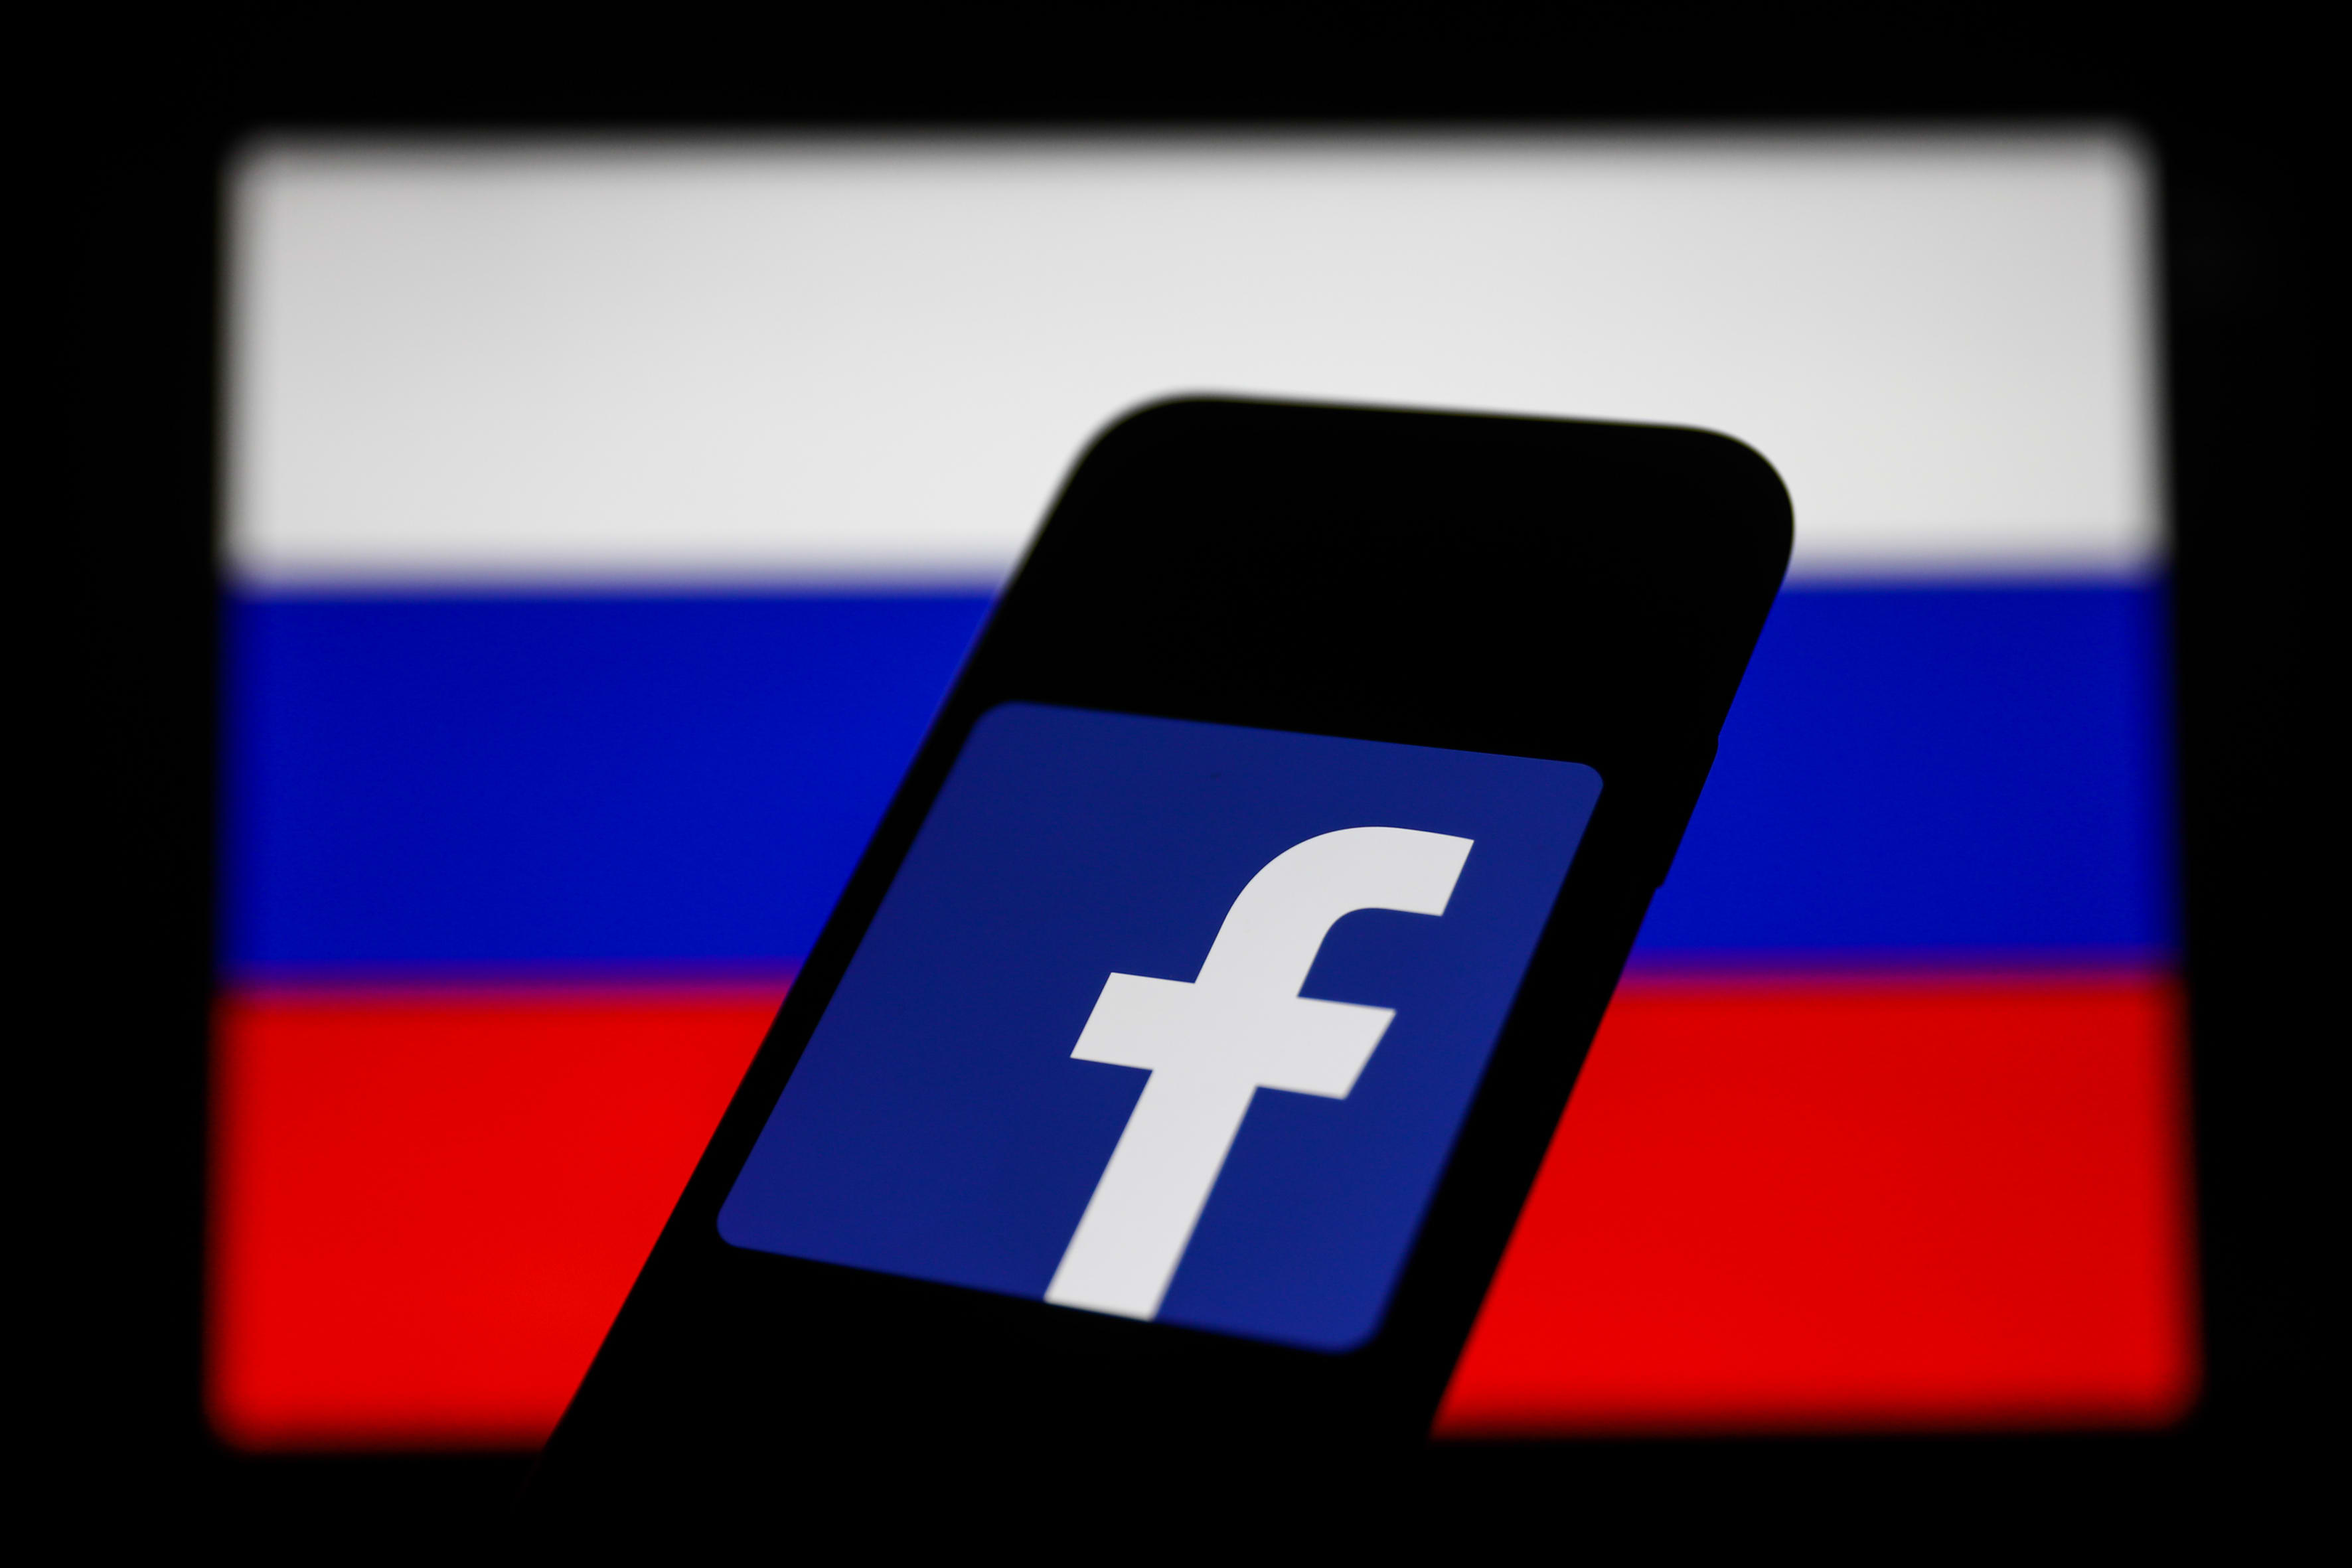 VPN use in Russia is surging as citizens try to bypass government’s tightening internet control